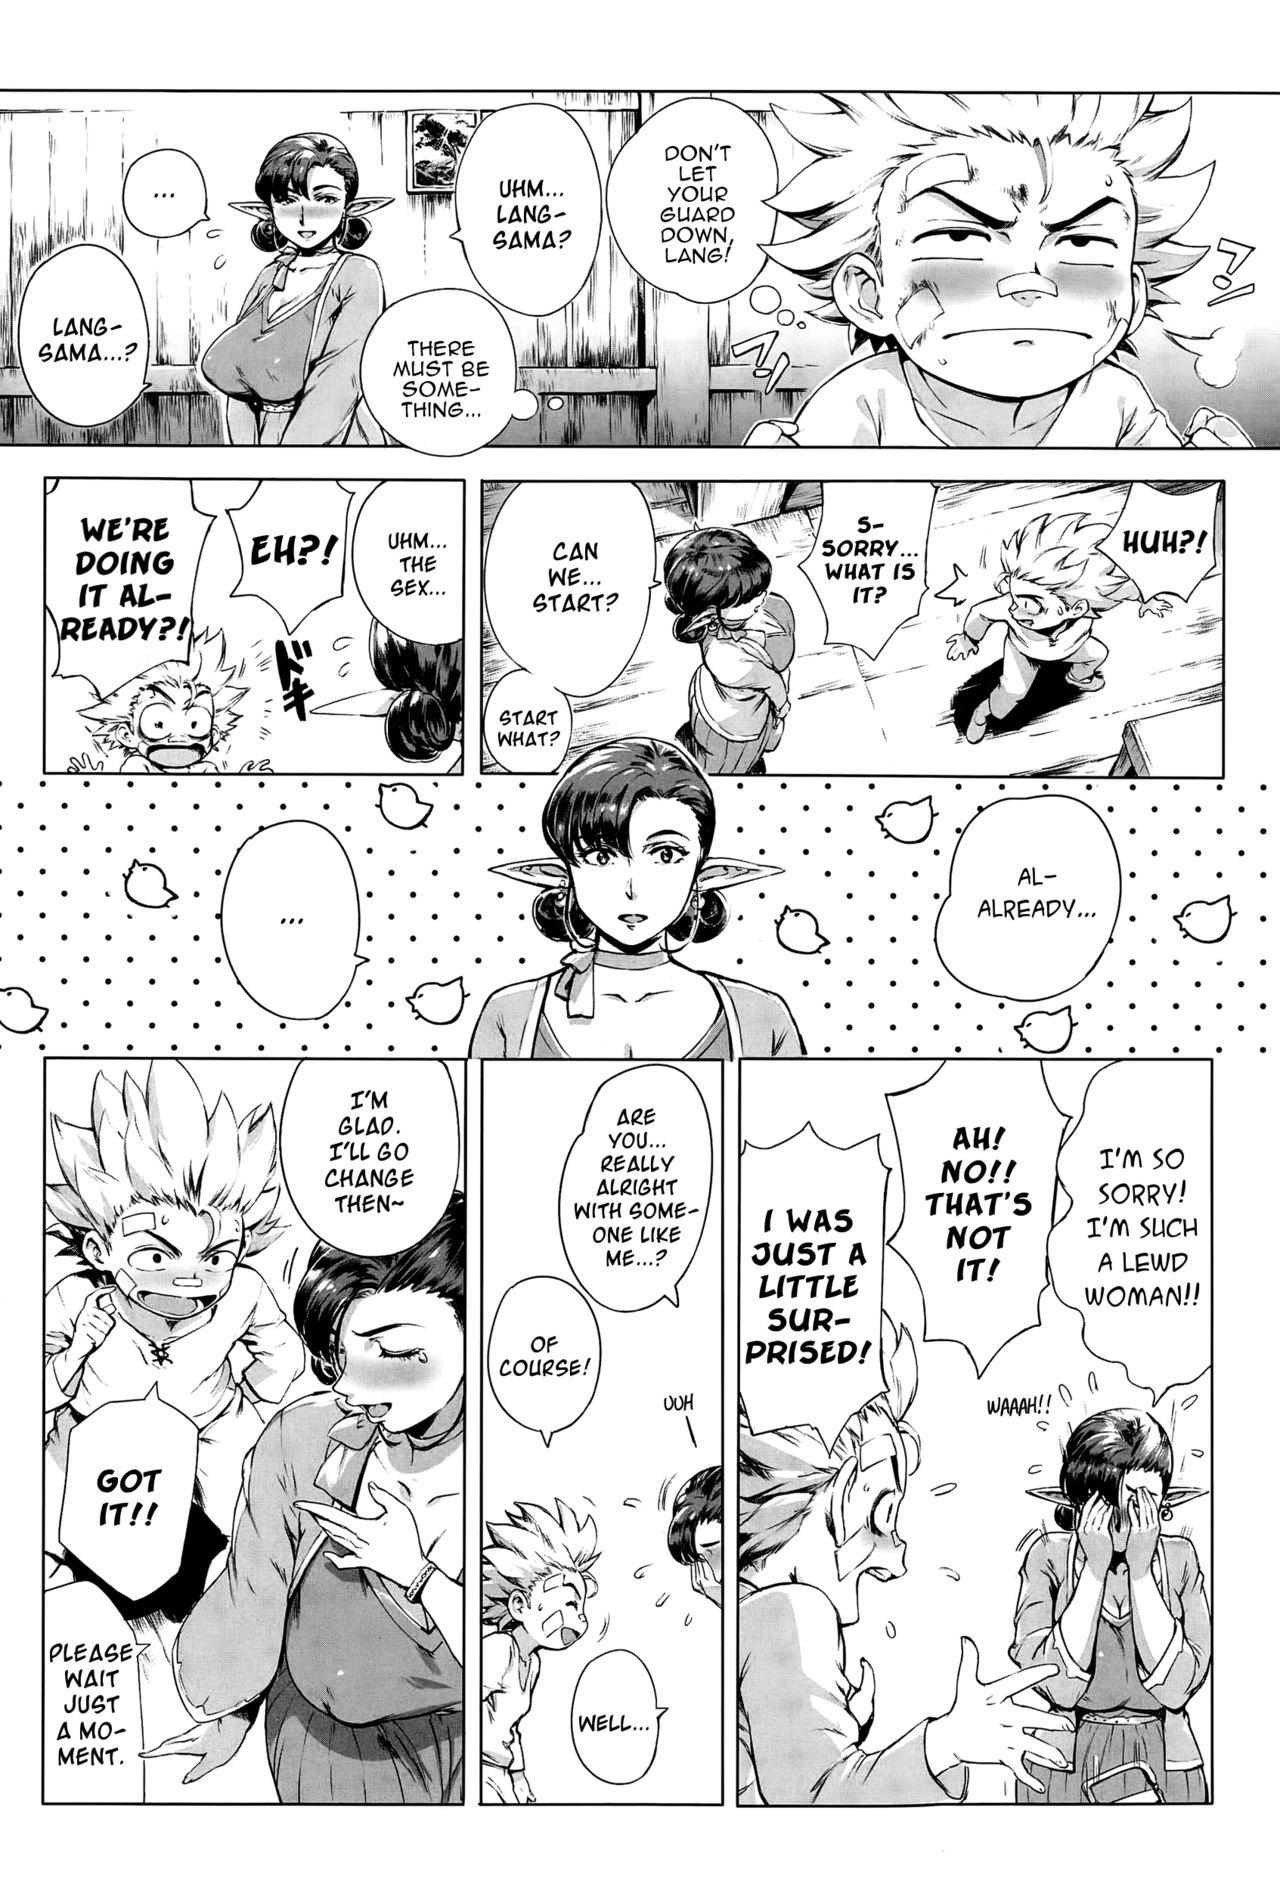 Moneytalks Koko ga Tanetsuke Frontier | This Is The Mating Frontier! Ch. 1-2 Foot - Page 10